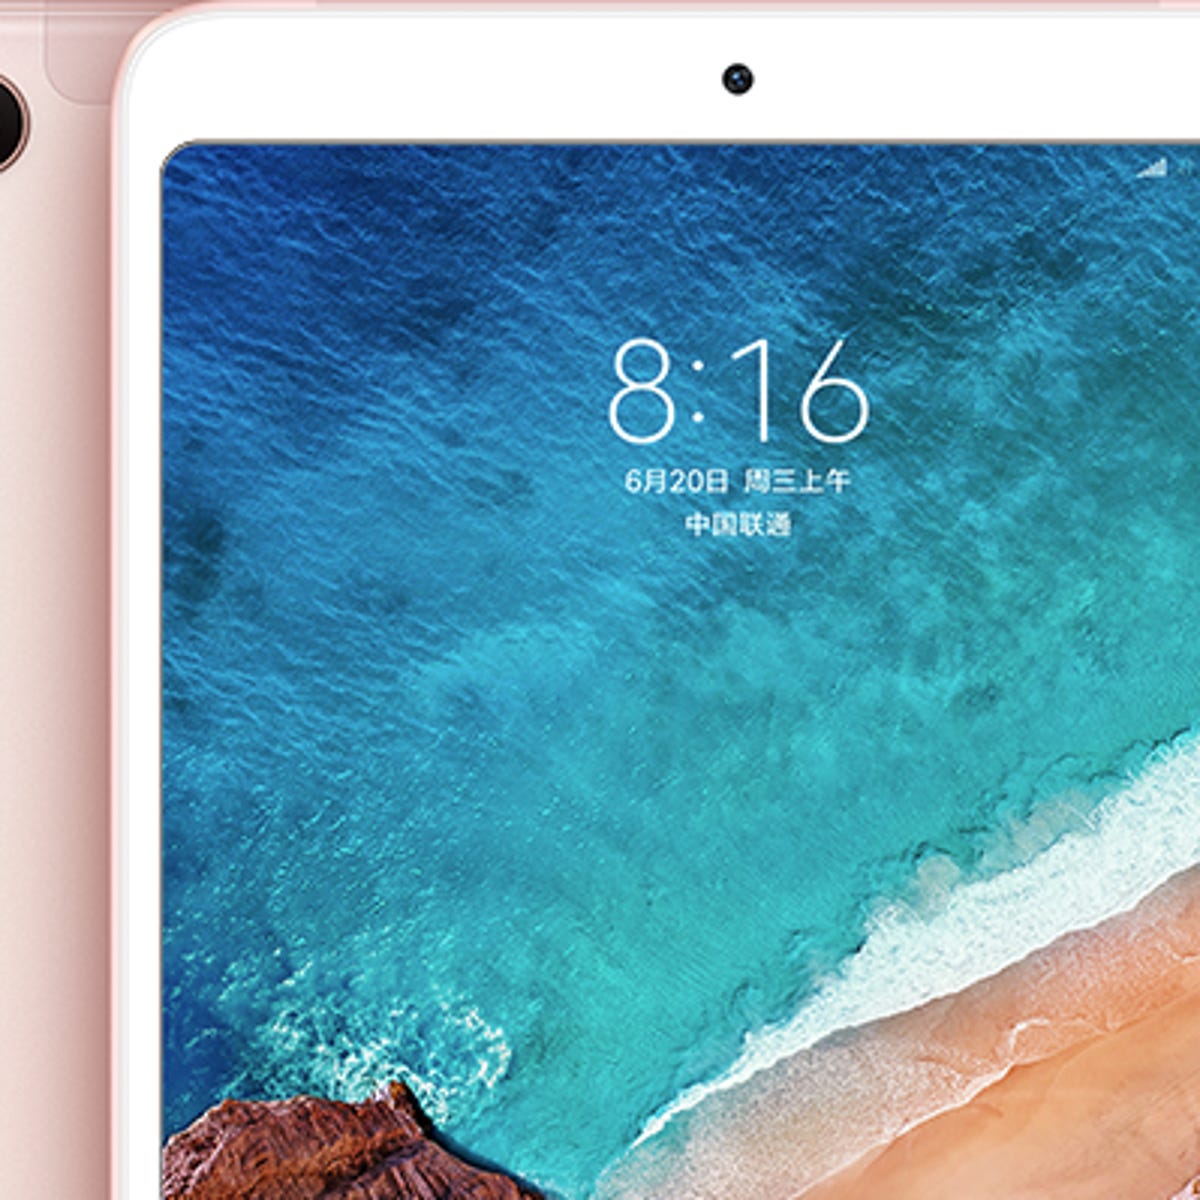 Xiaomi Mi Pad 4, a bargain tablet you may never see - CNET